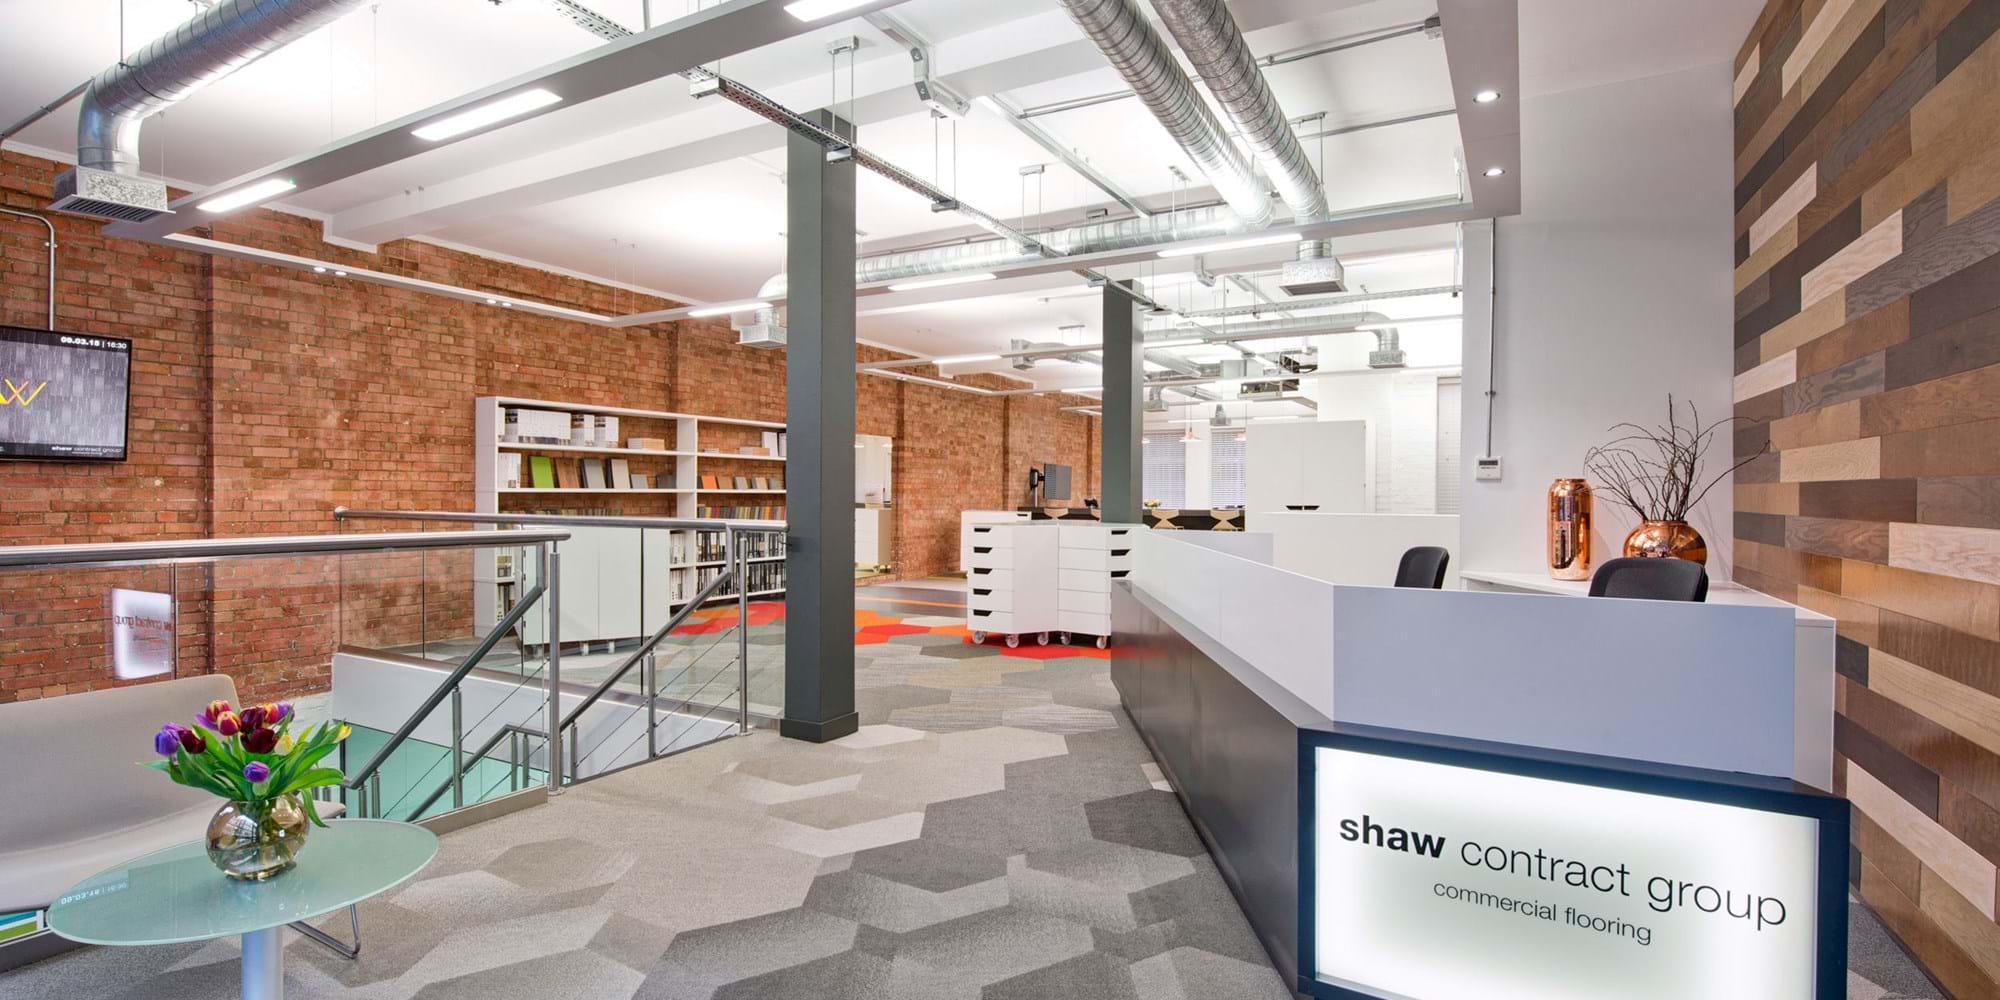 Modus Workspace office design, fit out and refurbishment - Shaw Contract Group - Reception - Shaw Carpets 02 highres sRGB.jpg